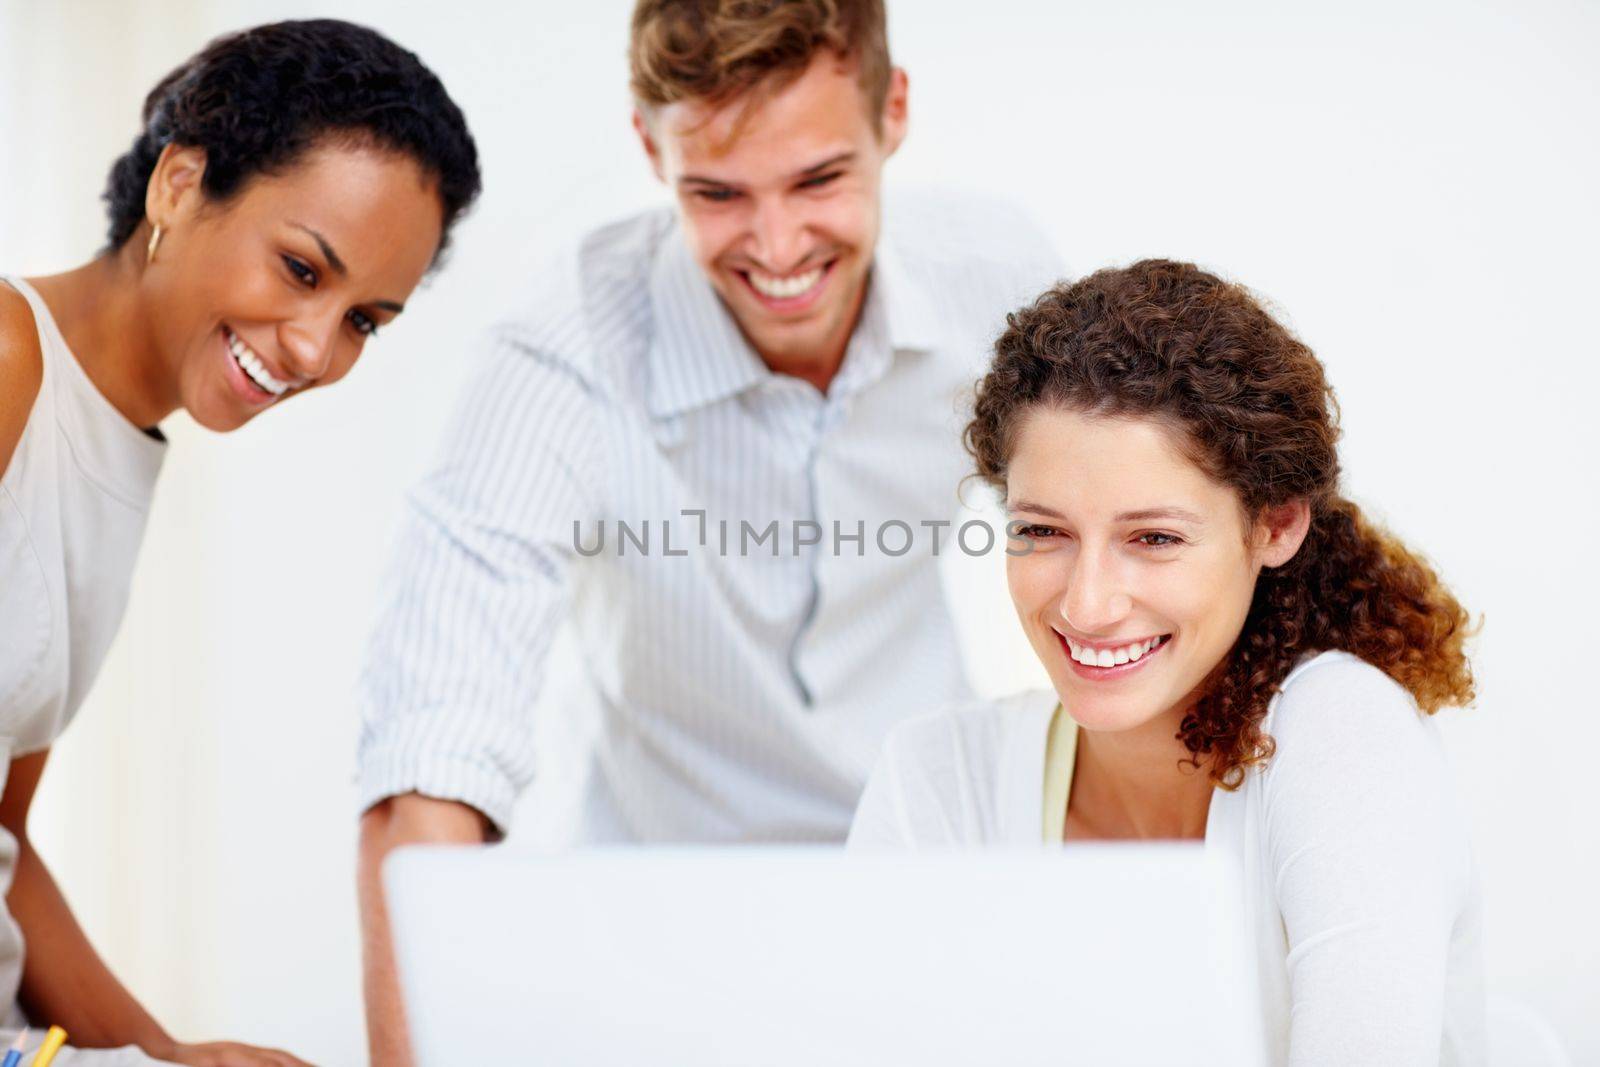 Business people working on laptop. Business people looking at laptop screen and smiling